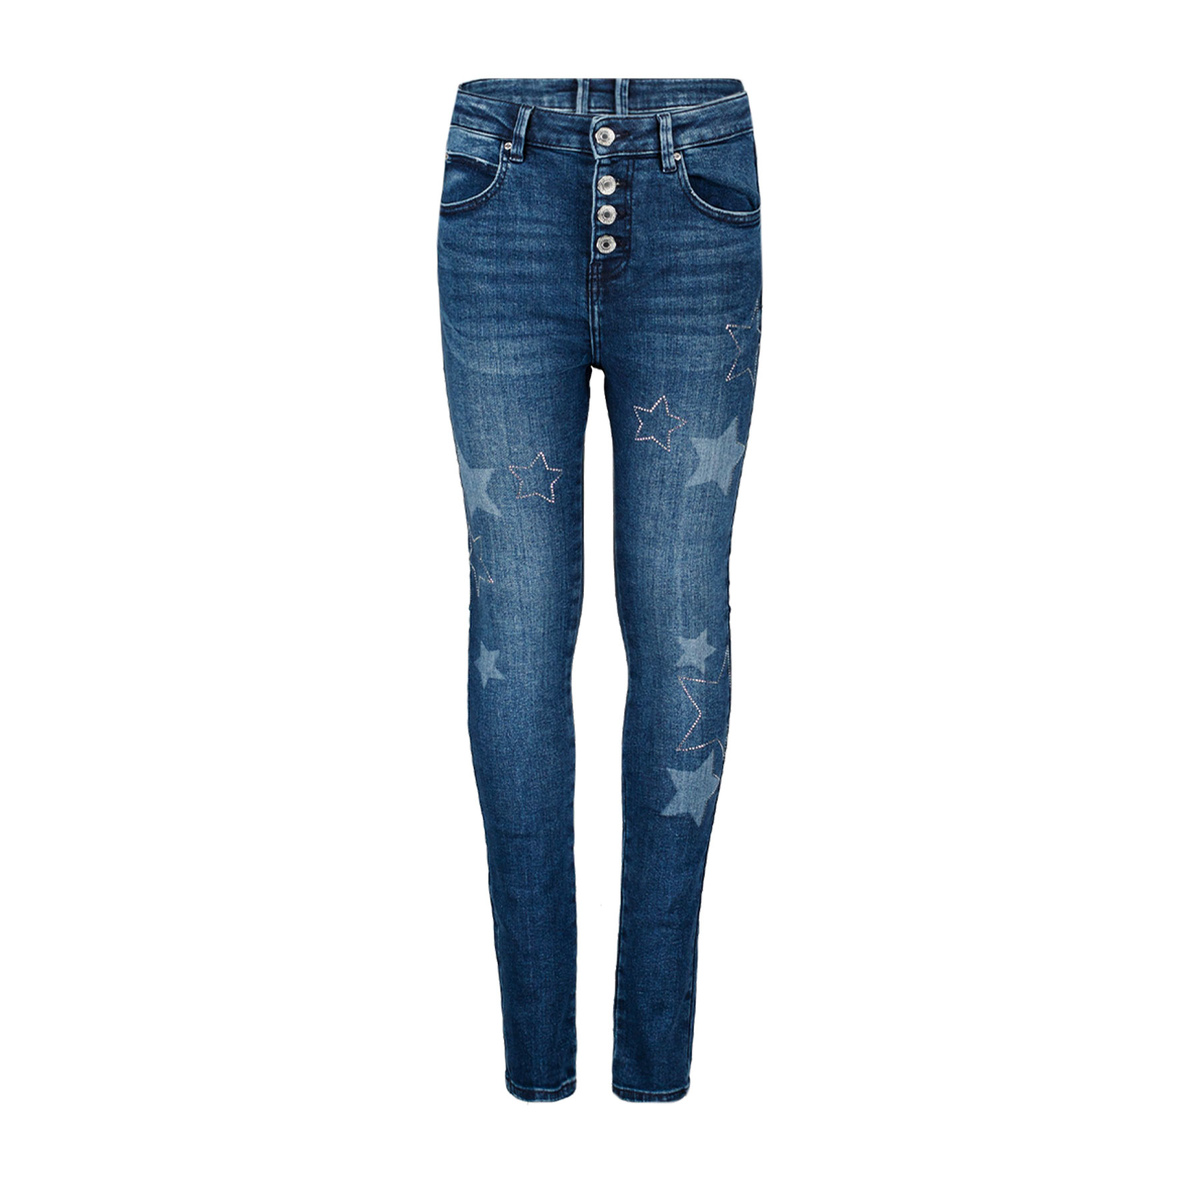 JEANS STELLE BAMBINA